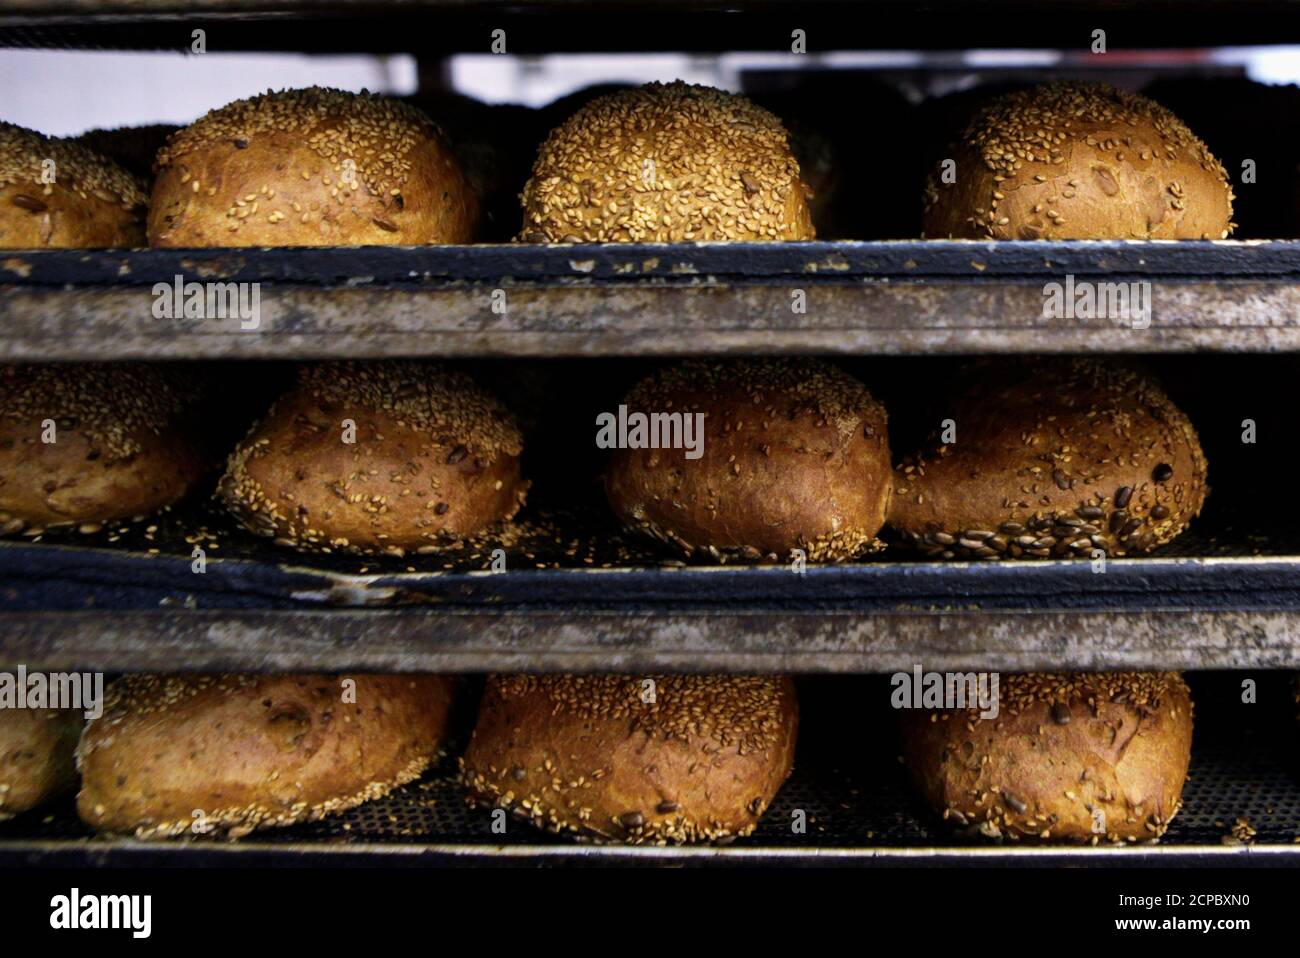 Freshly baked loaves of bread are stored on trays in a bakery in Berlin August 26, 2010.  Germany's 2010 grain crop of all types is likely to fall to around 43.9 million tonnes from 49.7 million tonnes last year, German farmers' association DBV said on Wednesday. German grain has suffered from an early summer heatwave followed by heavy harvest-time rain, it said.  REUTERS/Thomas Peter (GERMANY - Tags: BUSINESS FOOD AGRICULTURE) Stock Photo